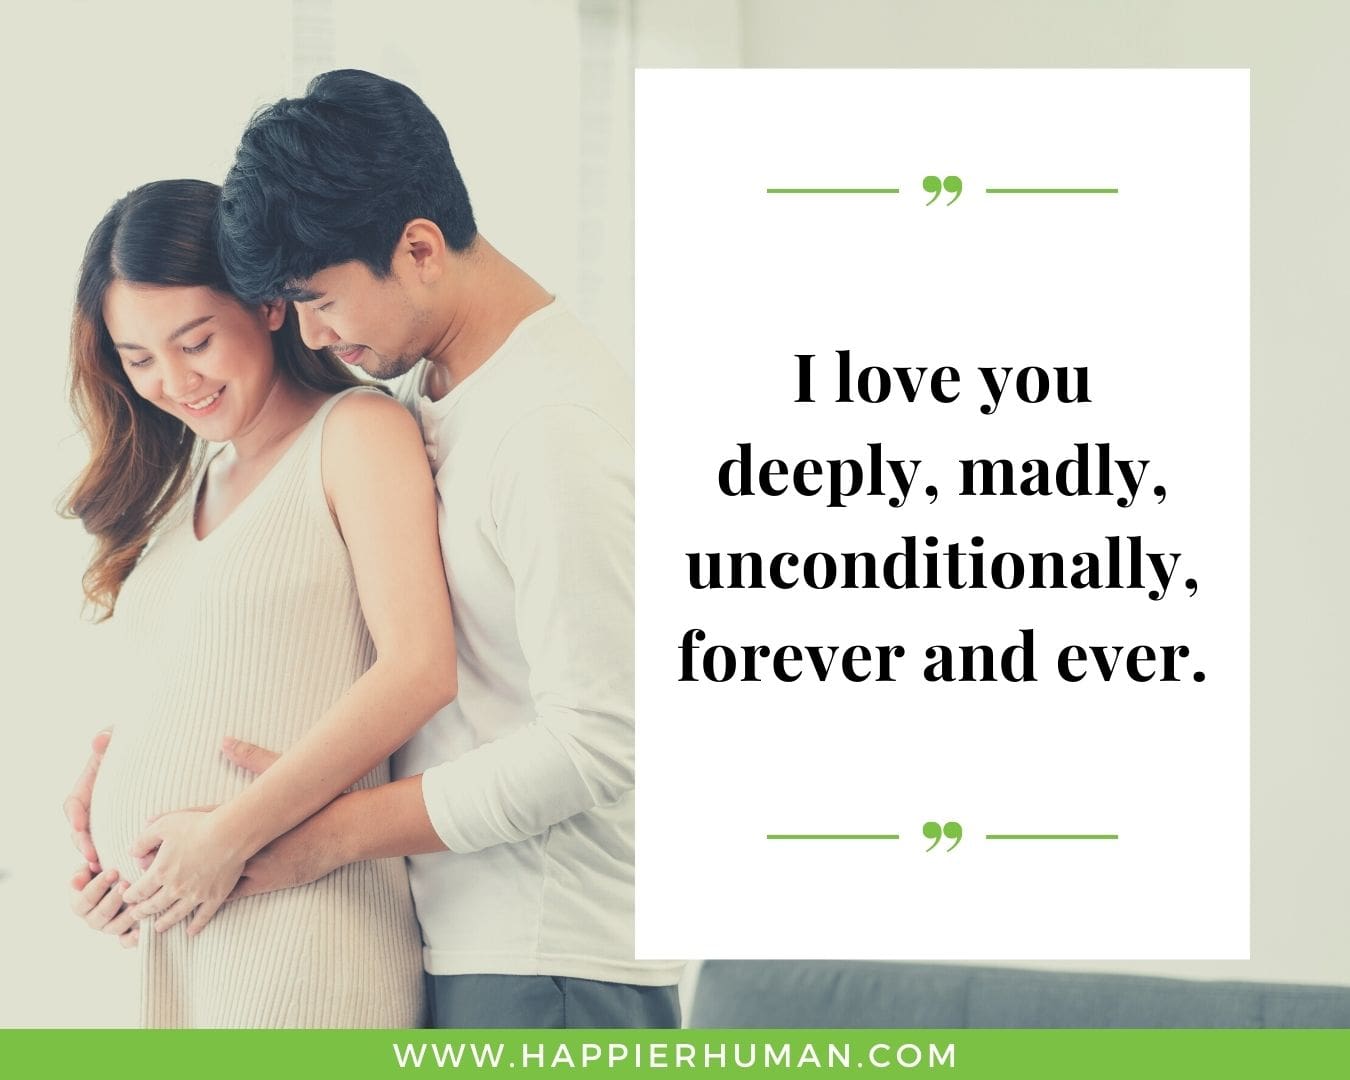 Deep words of love and caring- “I love you deeply, madly, unconditionally, forever and ever.”